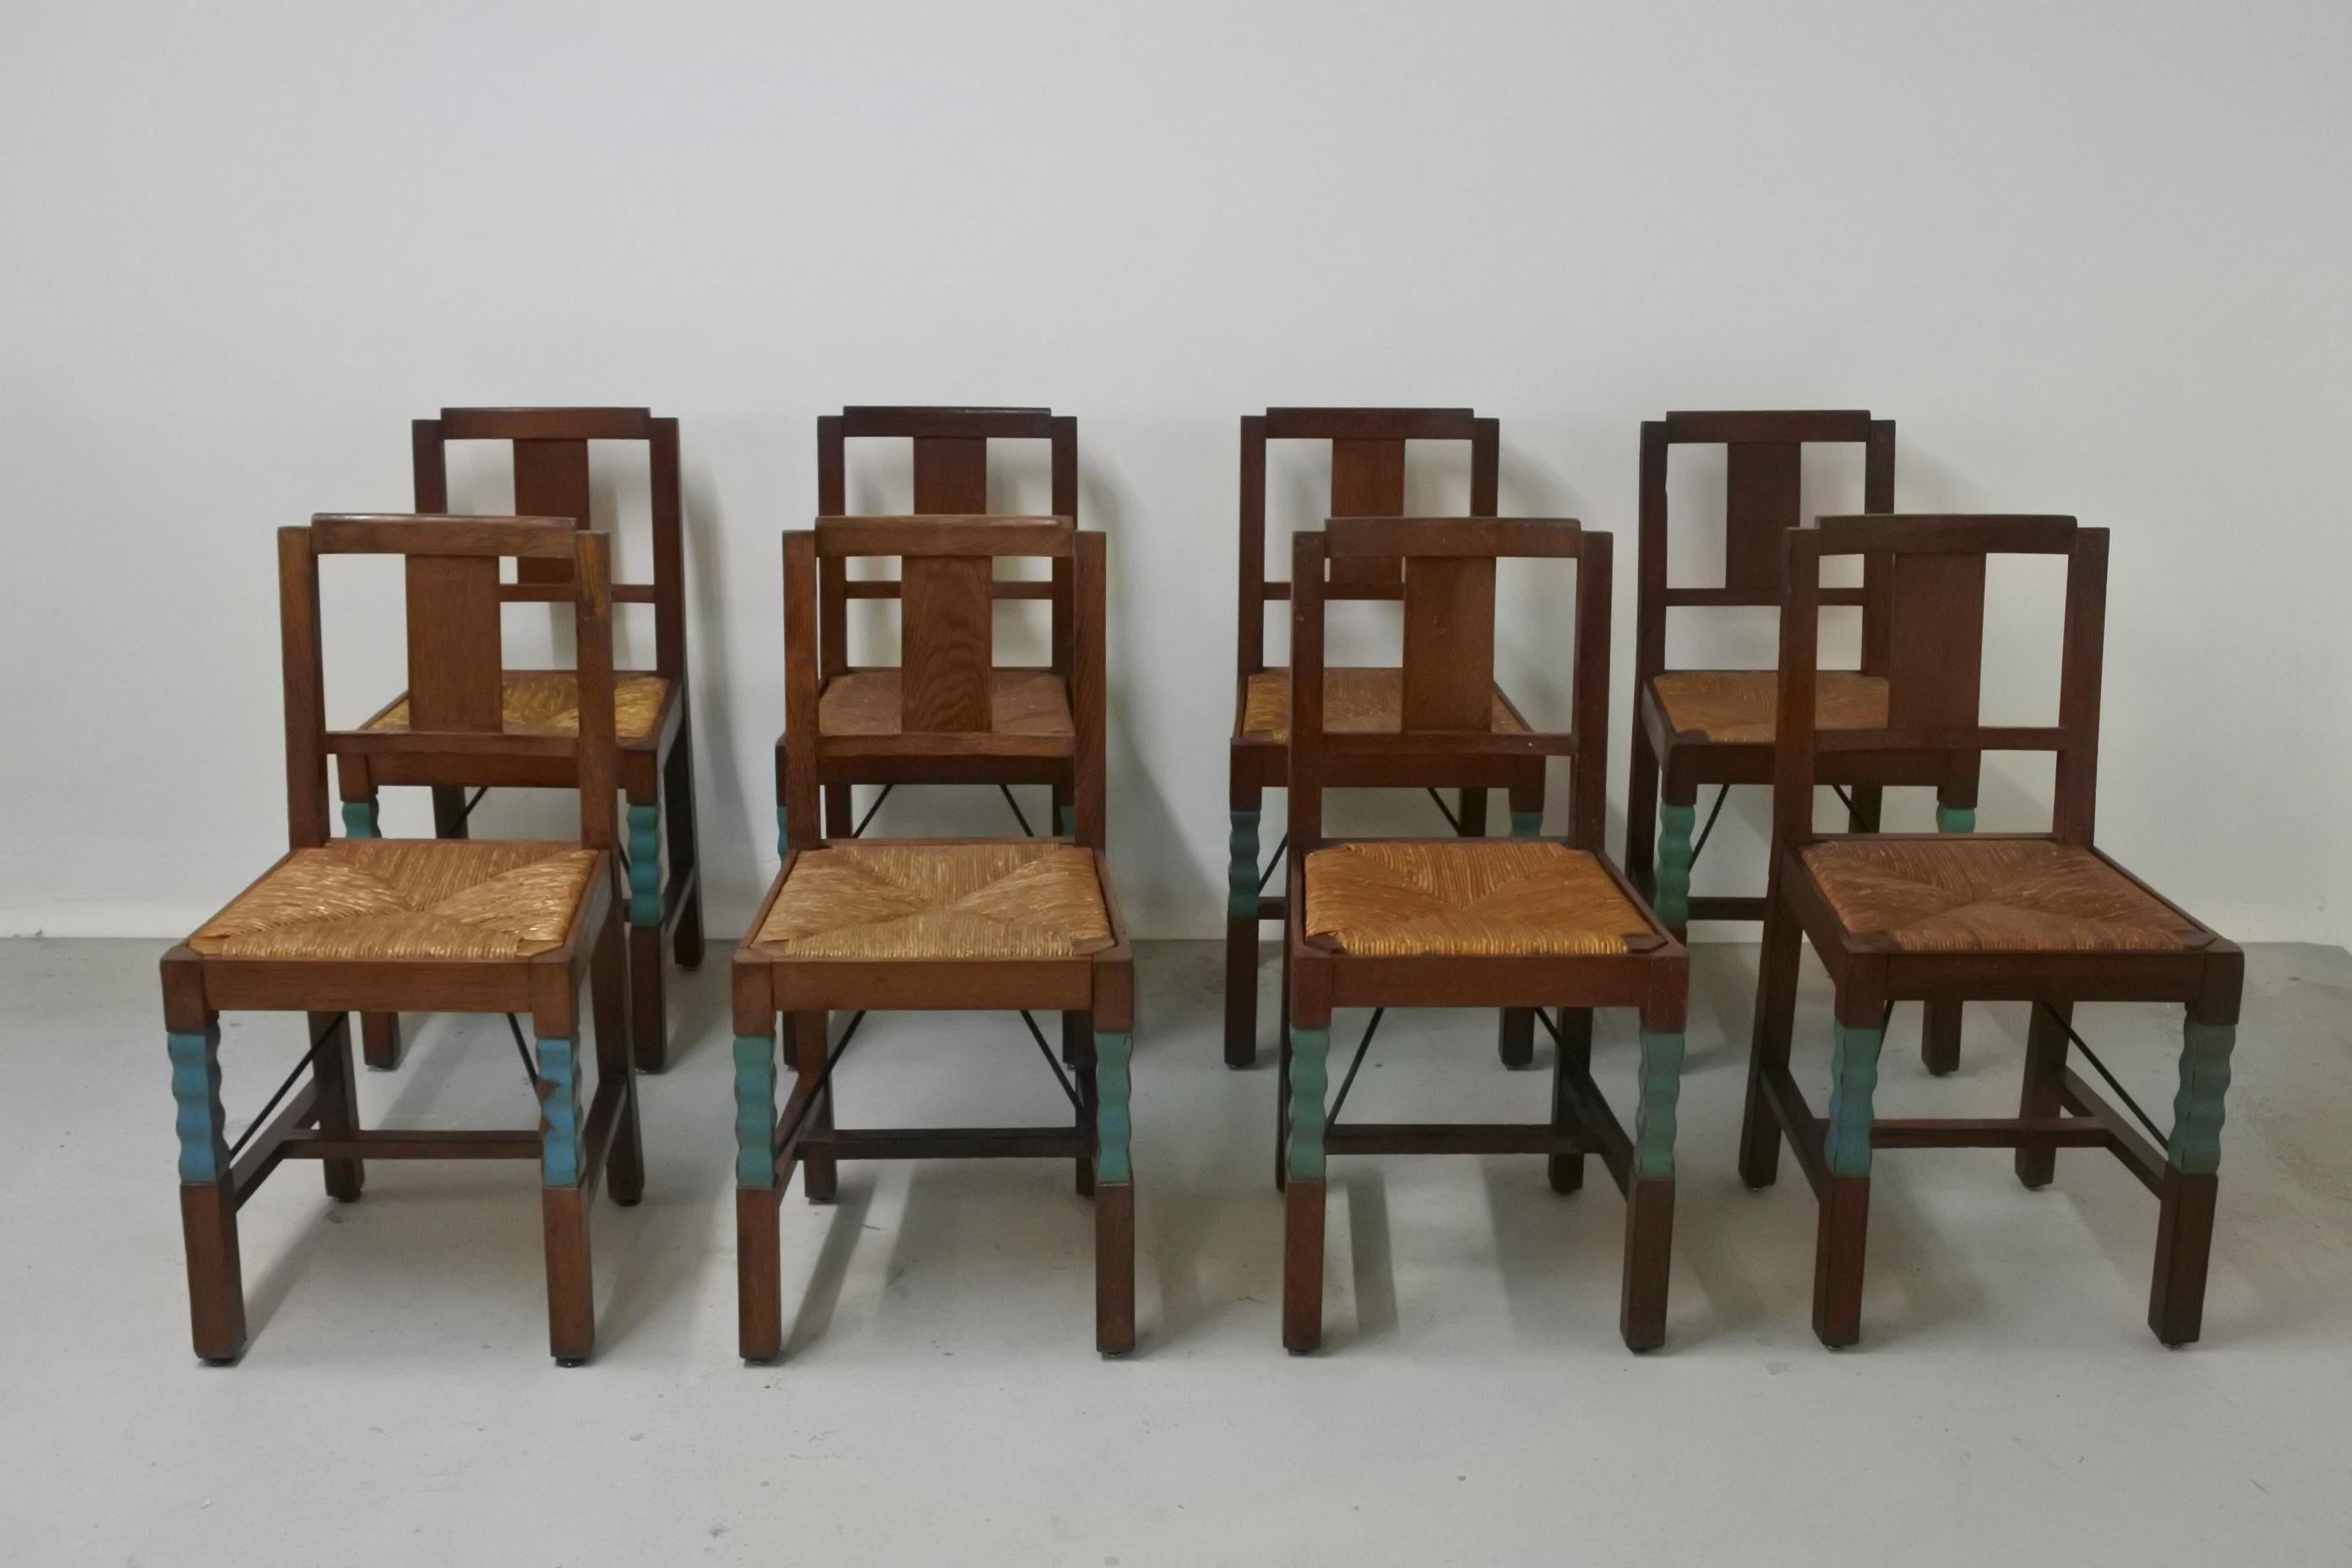 Set of eight dining chairs in the style of French woodworker Joseph Savina.

Oak wood and rush seats. Carved and painted front legs.
Beautiful details.

A metallic structure was added under the seat in the 1950s to preserve the chairs. 
They